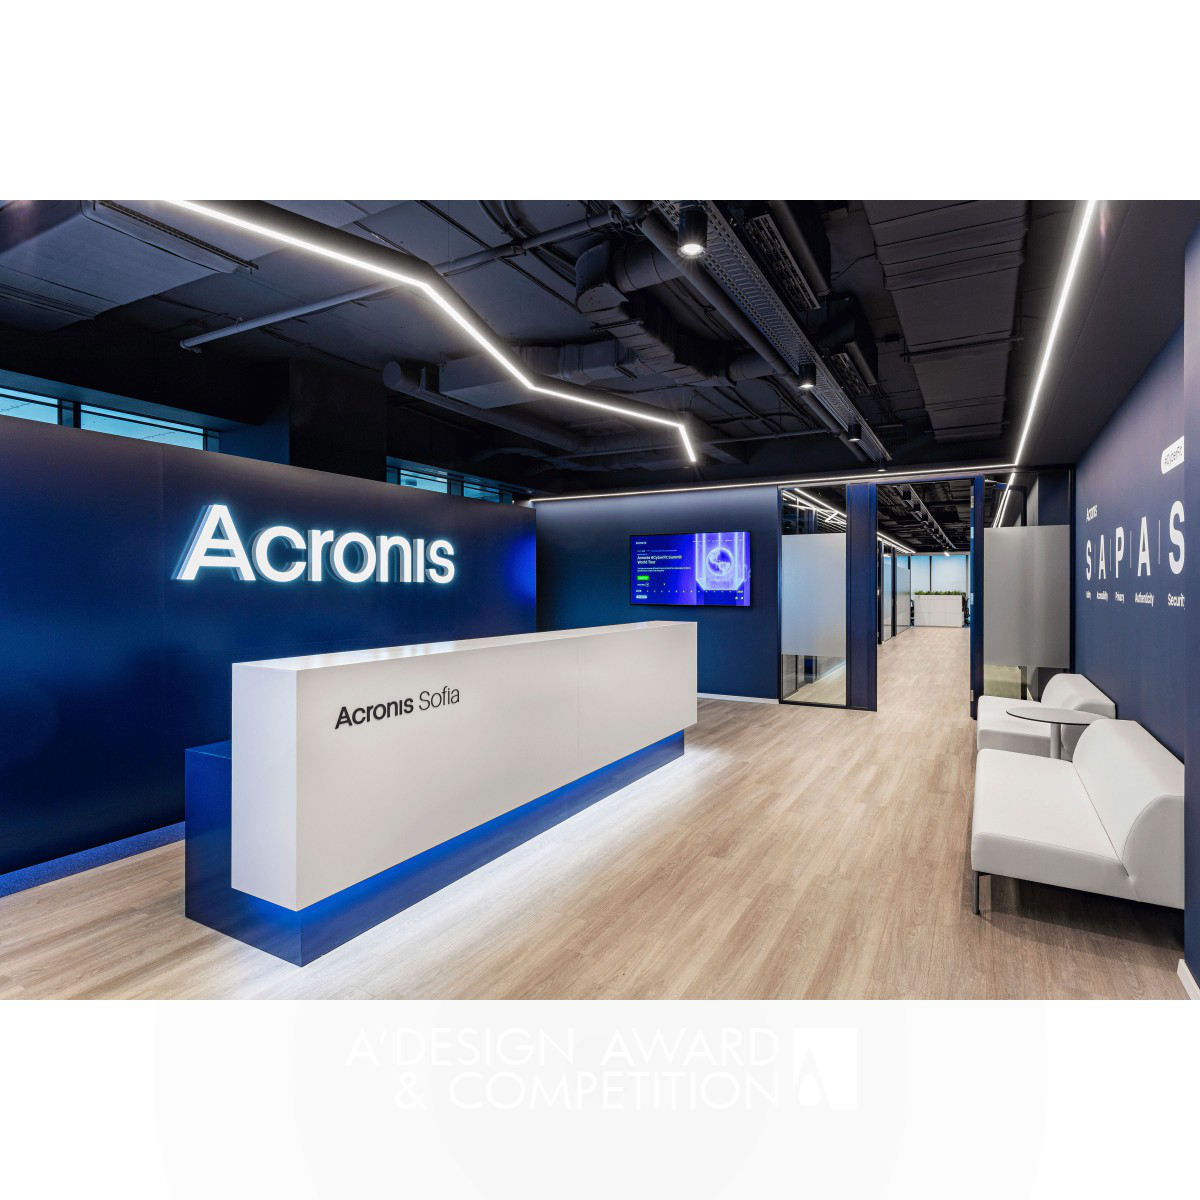 Acronis Sofia Office Space by Helen Koss Iron Interior Space and Exhibition Design Award Winner 2022 